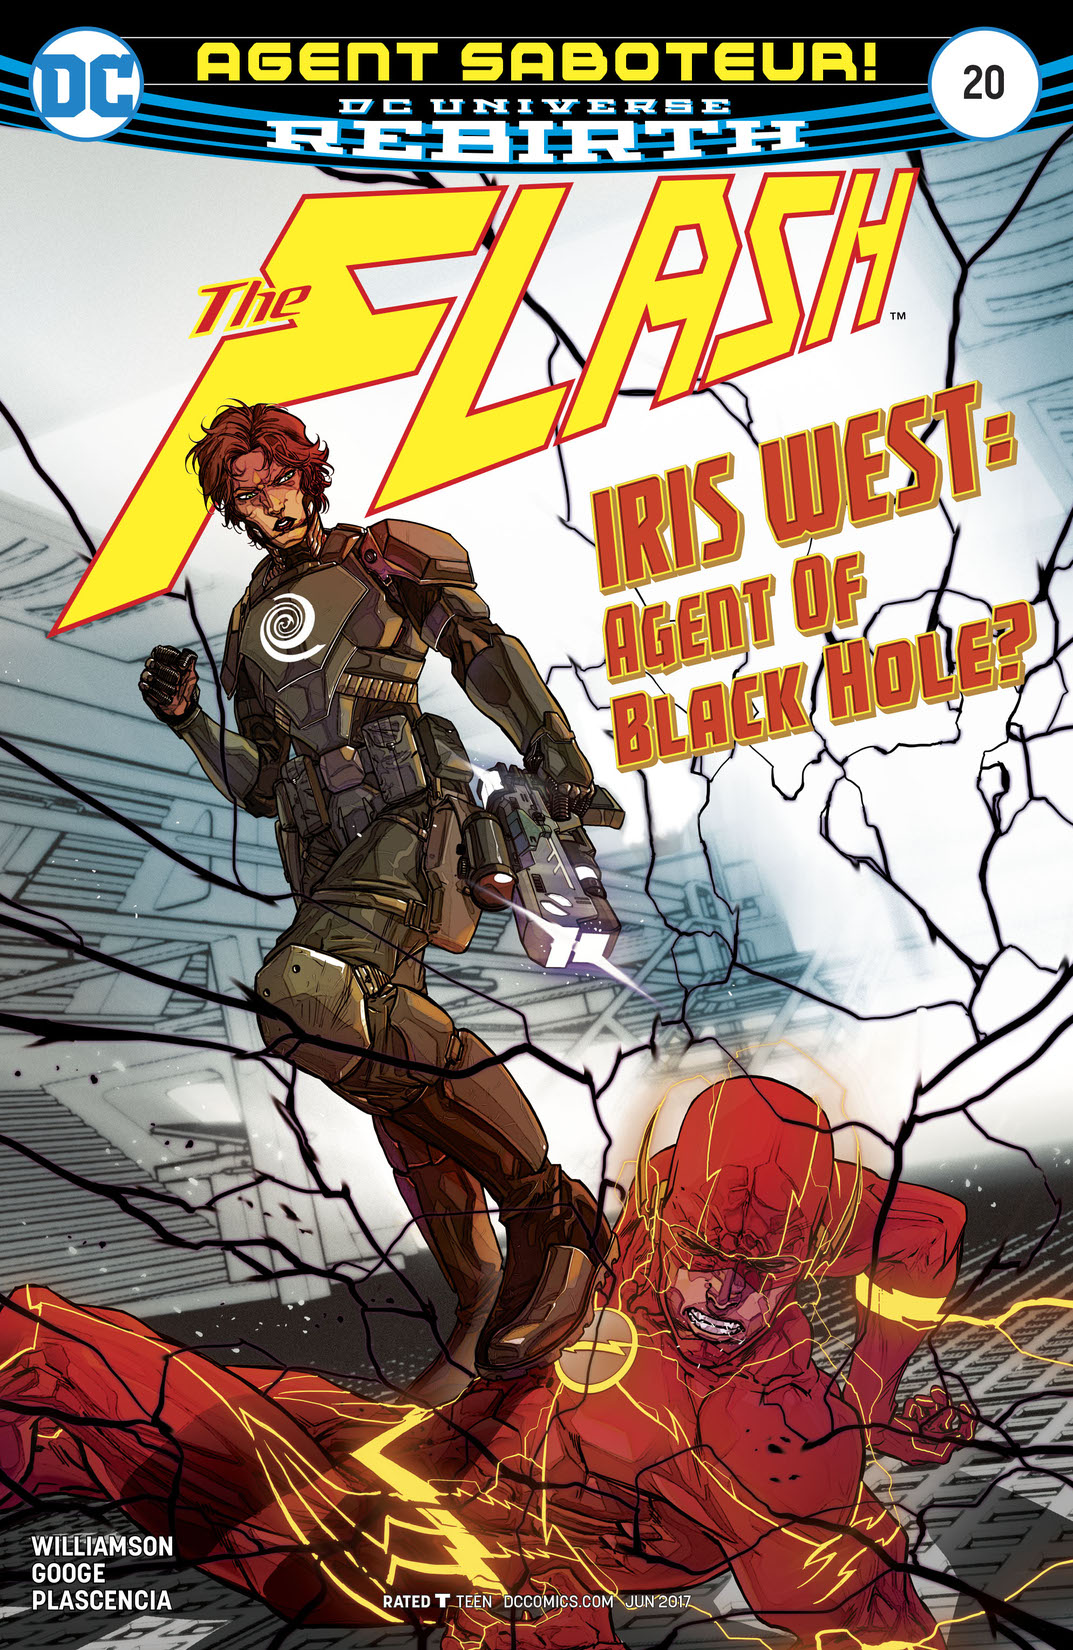 The Flash (2016-) #20 preview images